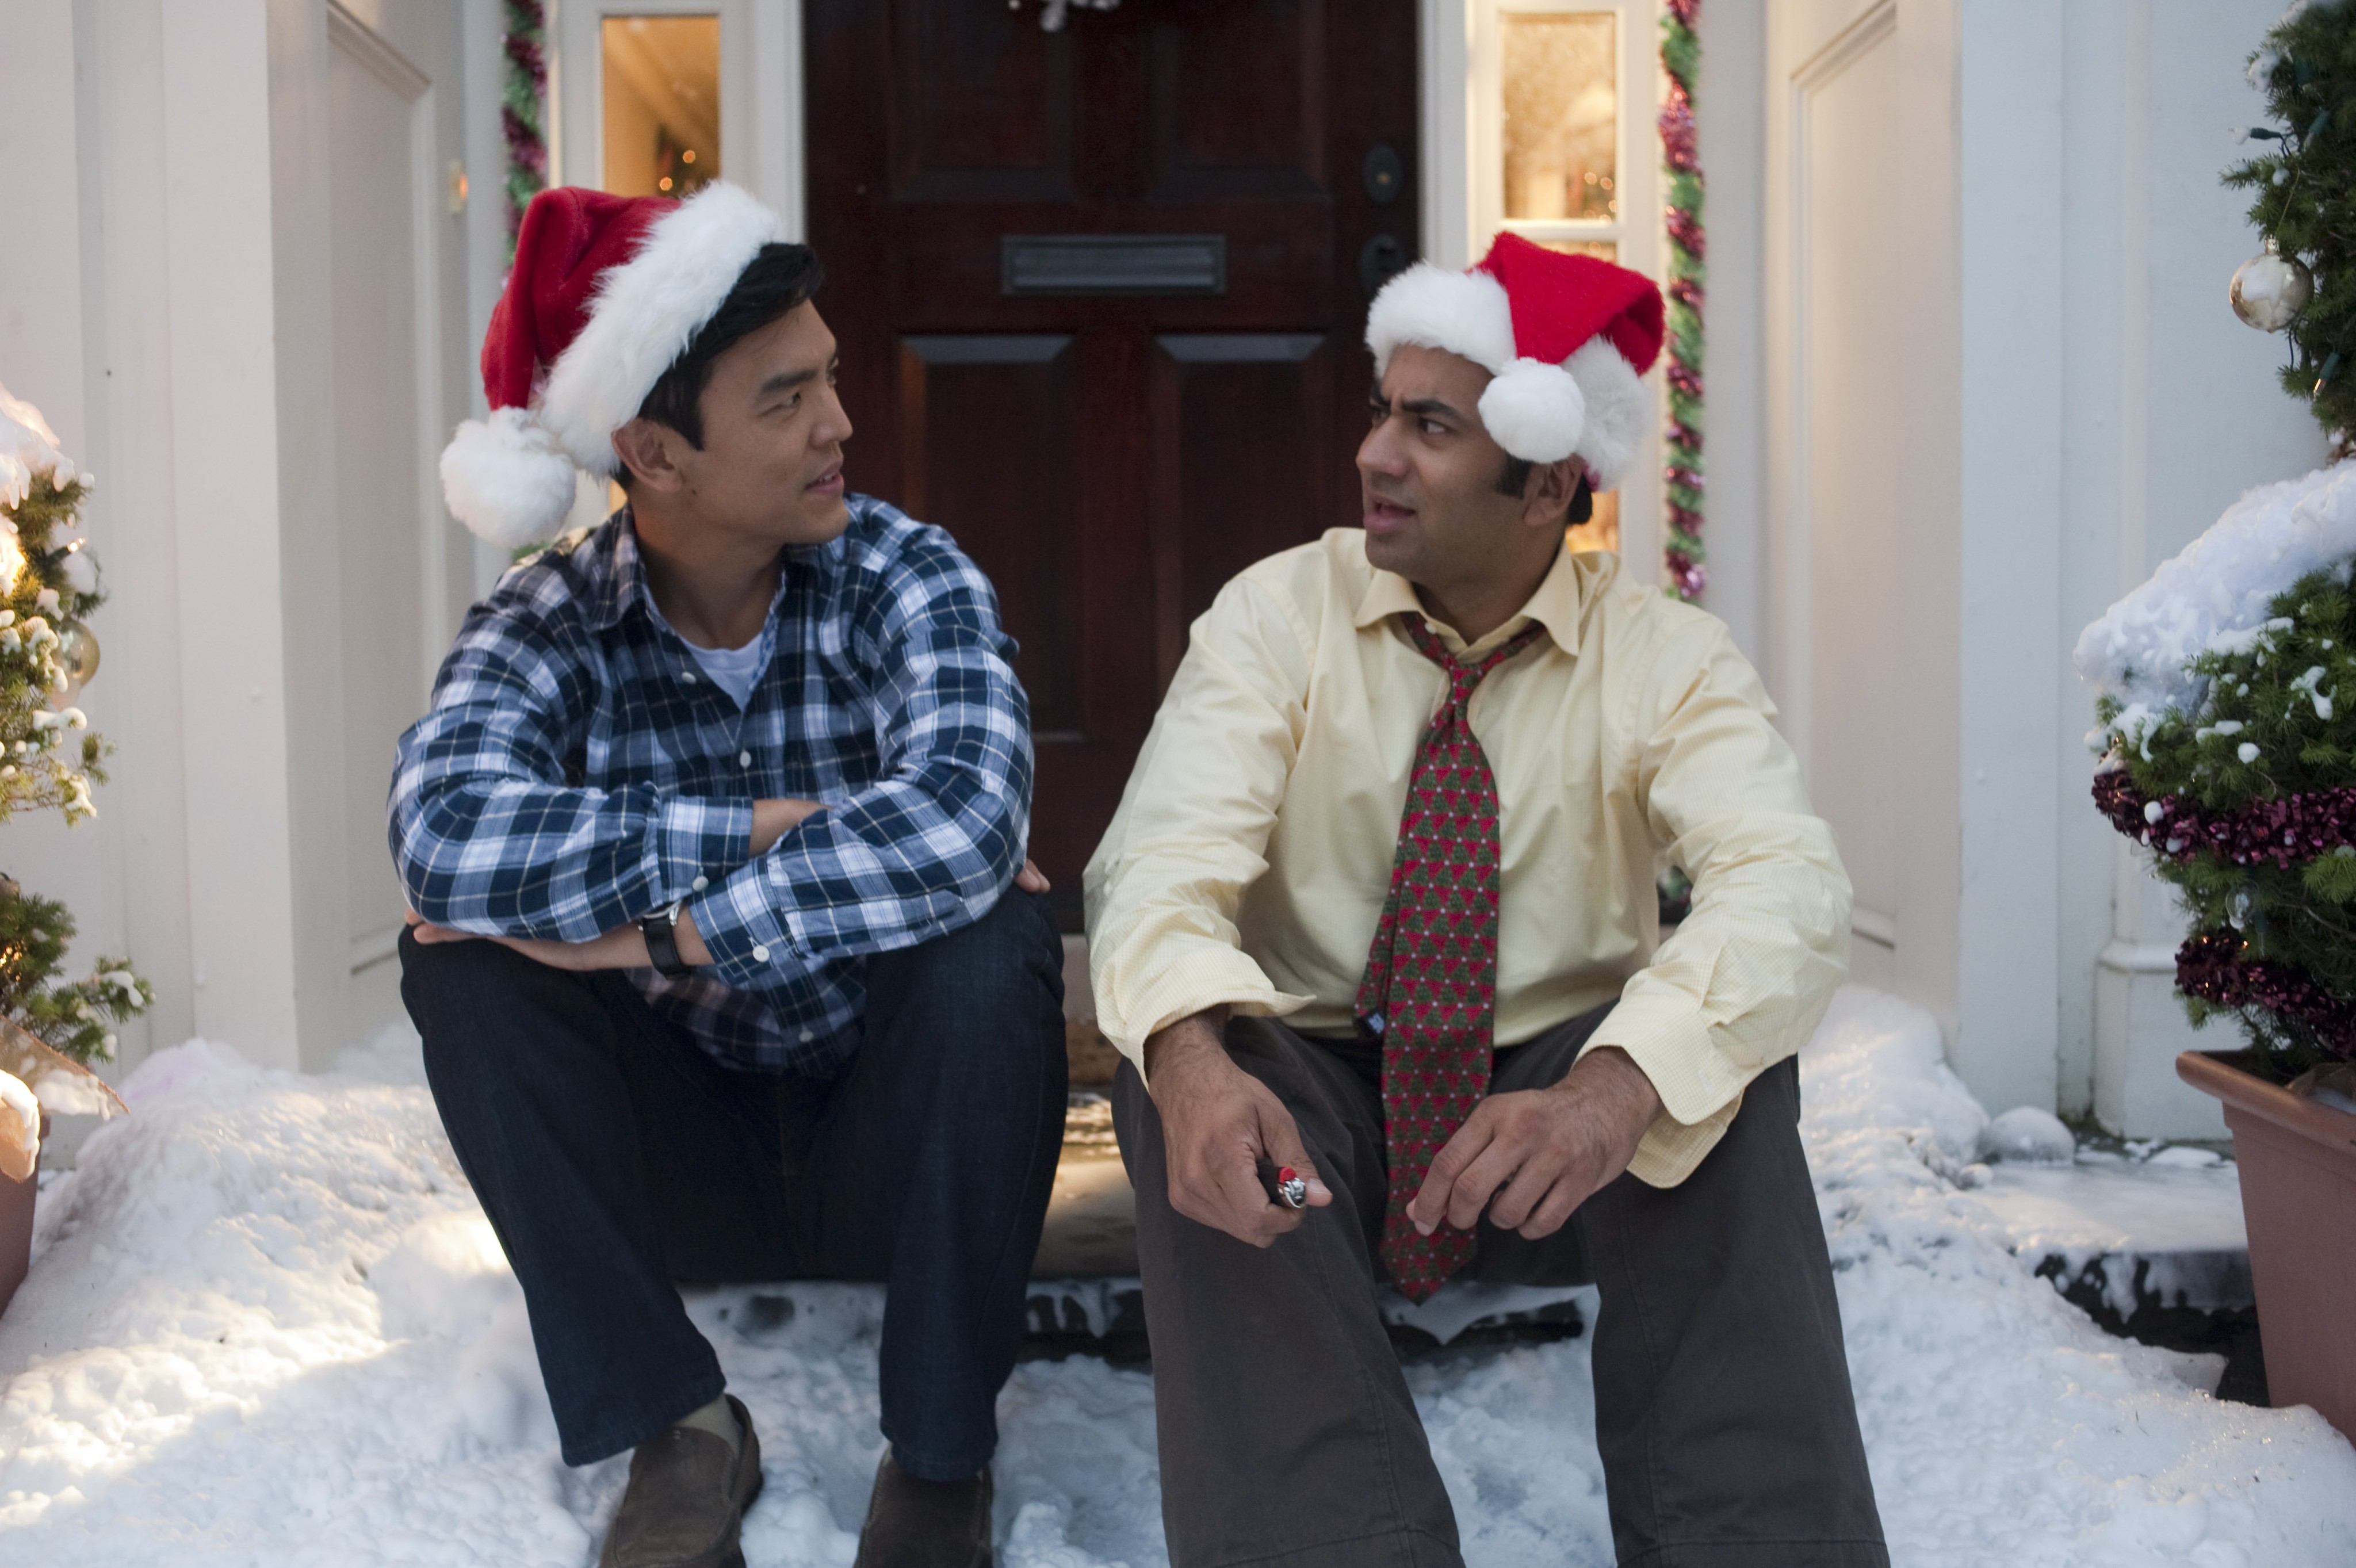 A Very Harold And Kumar Christmas Trailer 1 Trailers And Videos Rotten Tomatoes 